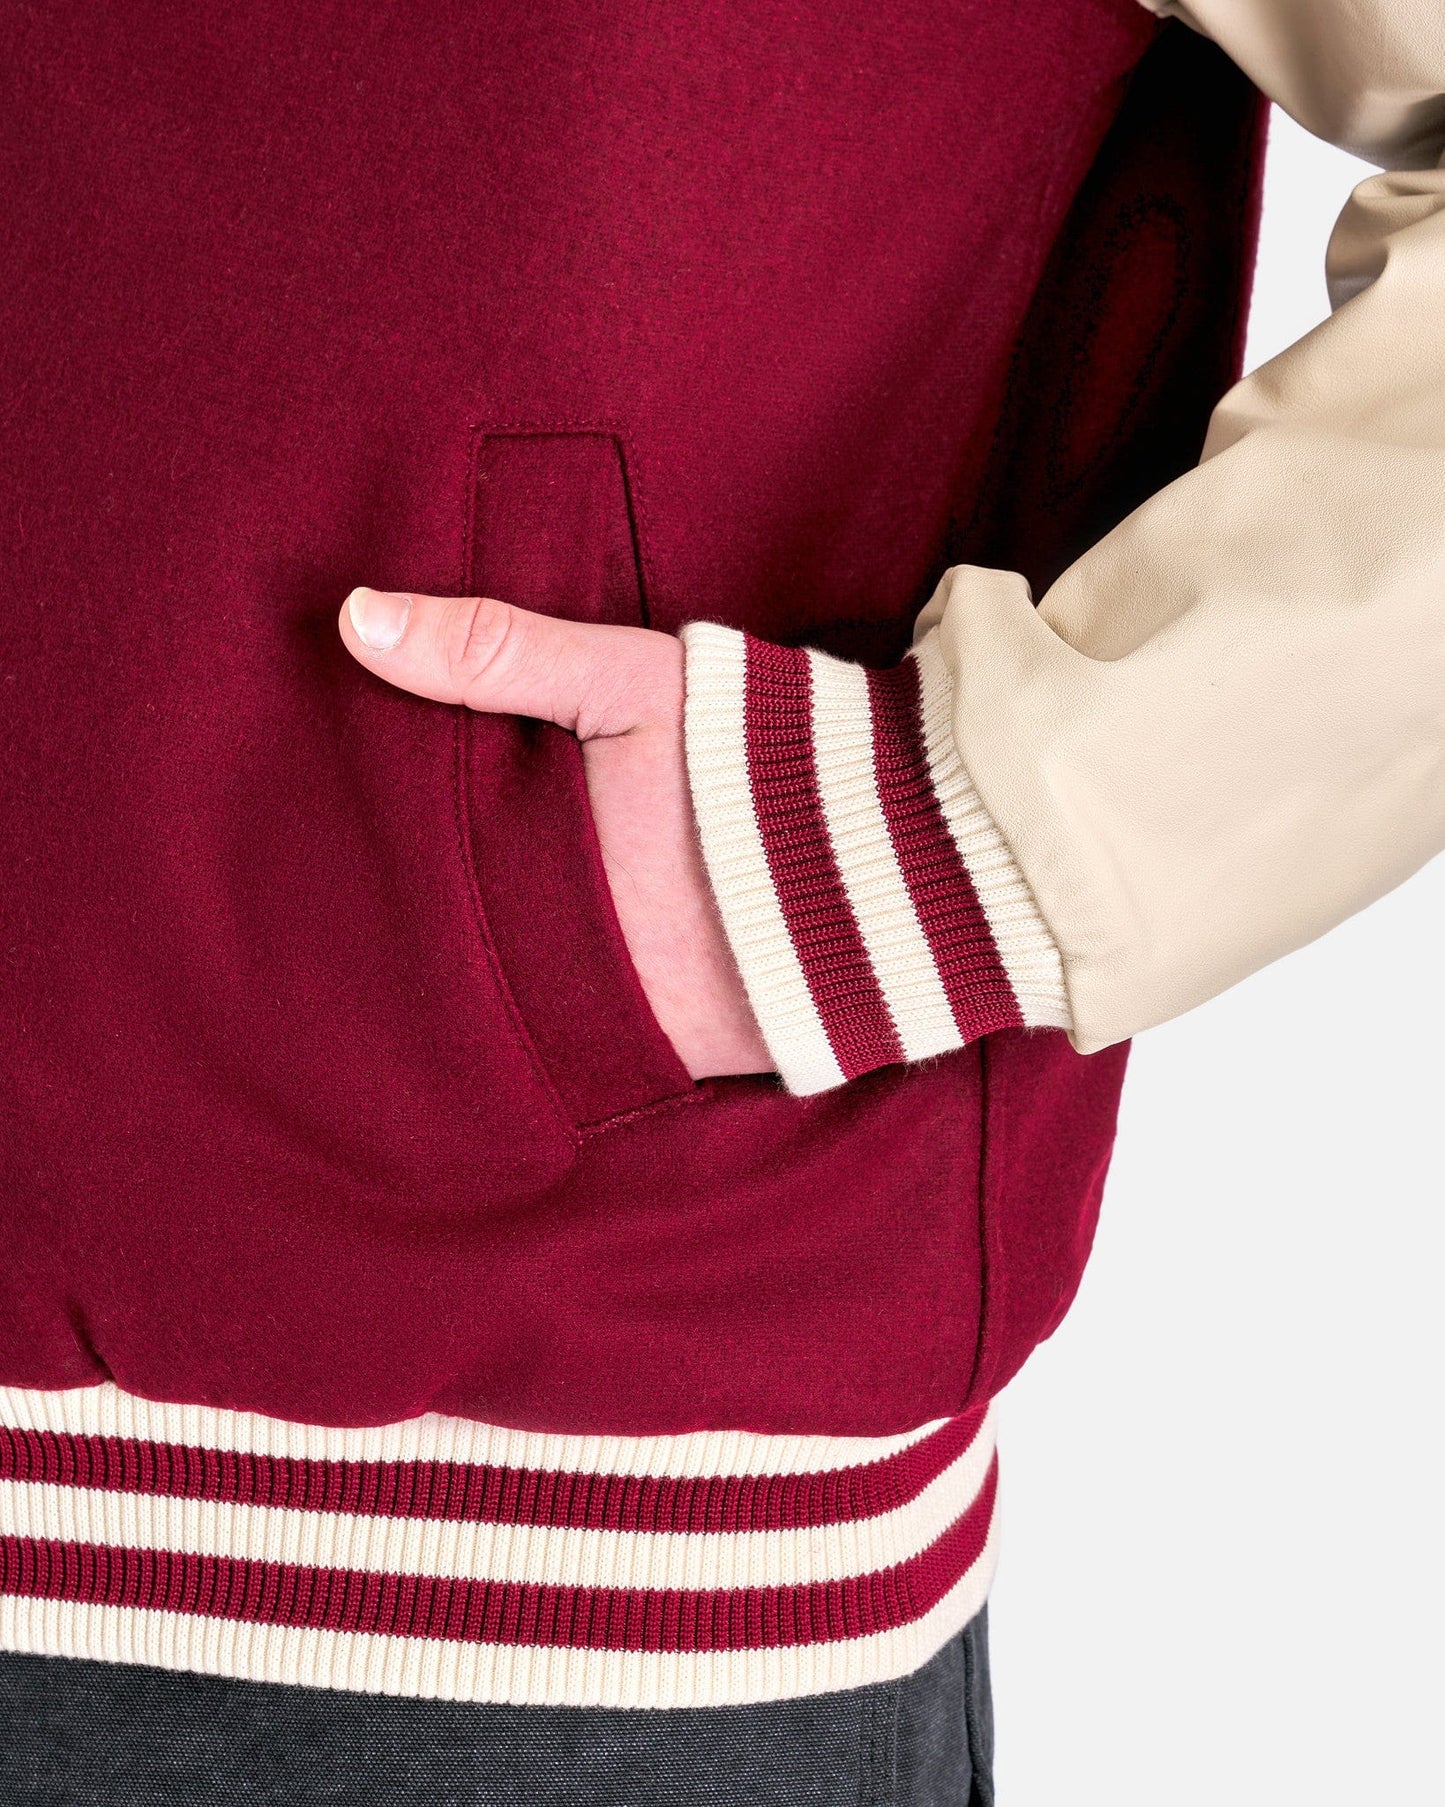 One of These Days Men's Jackets L Horse Shoe Cardinal Varsity in Burgundy/Bone